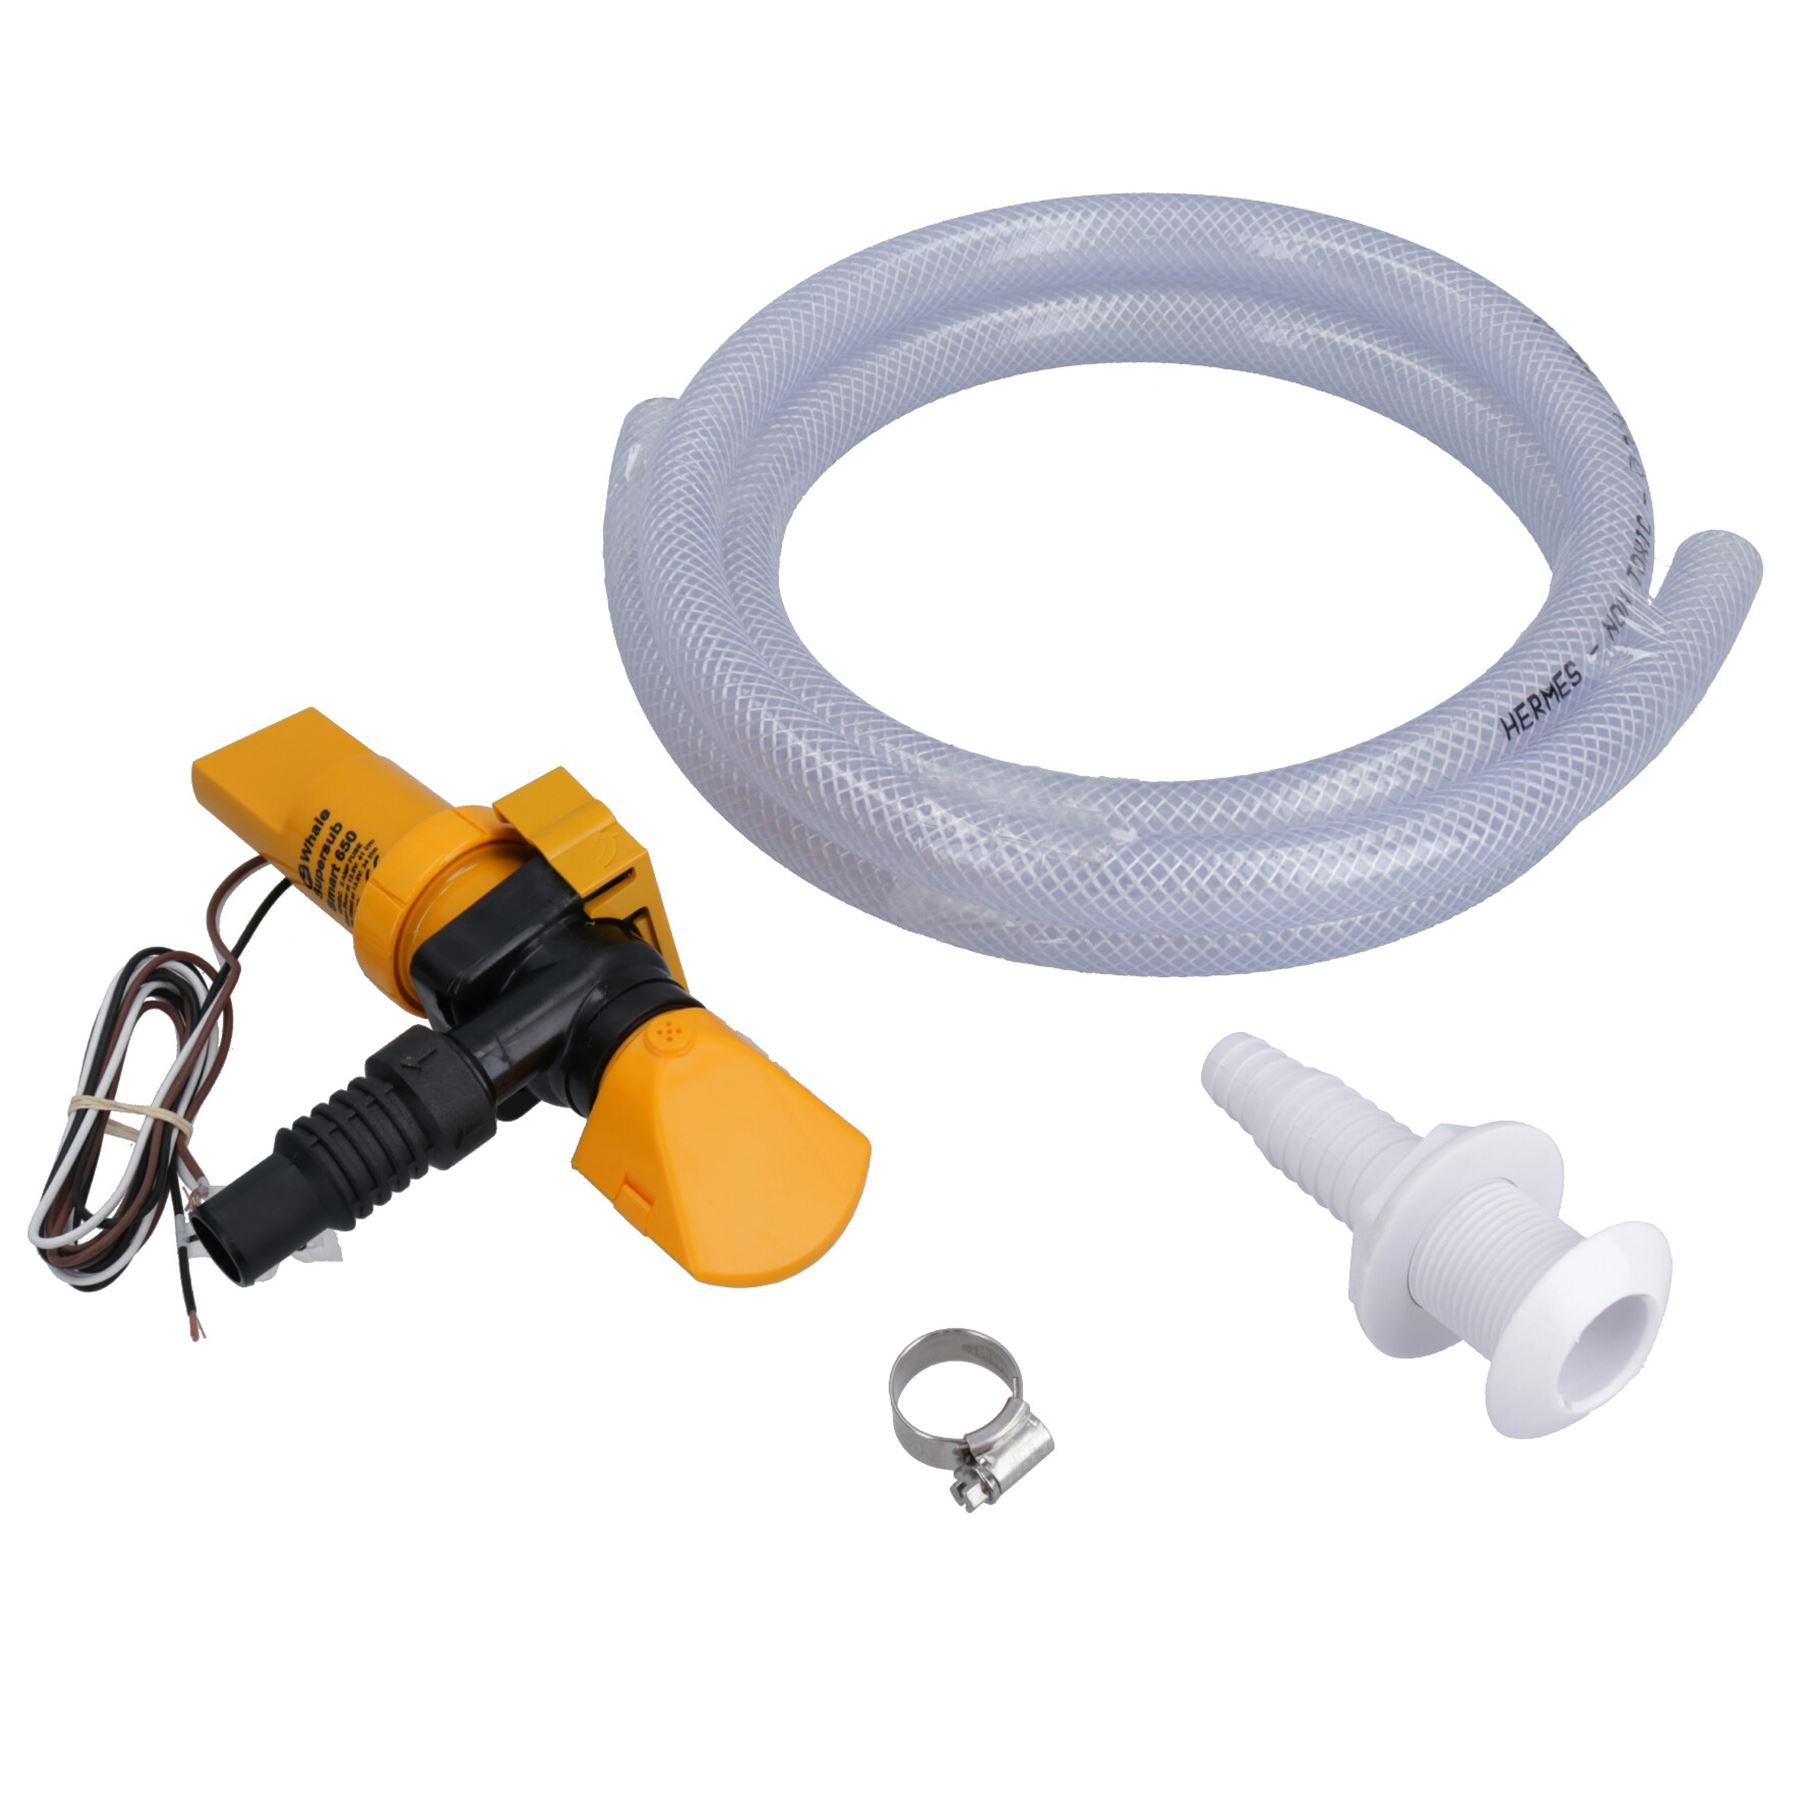 Automatic Bilge Pump Kit Whale Supersub 650 2m Hose Hull Fitting Boat Water